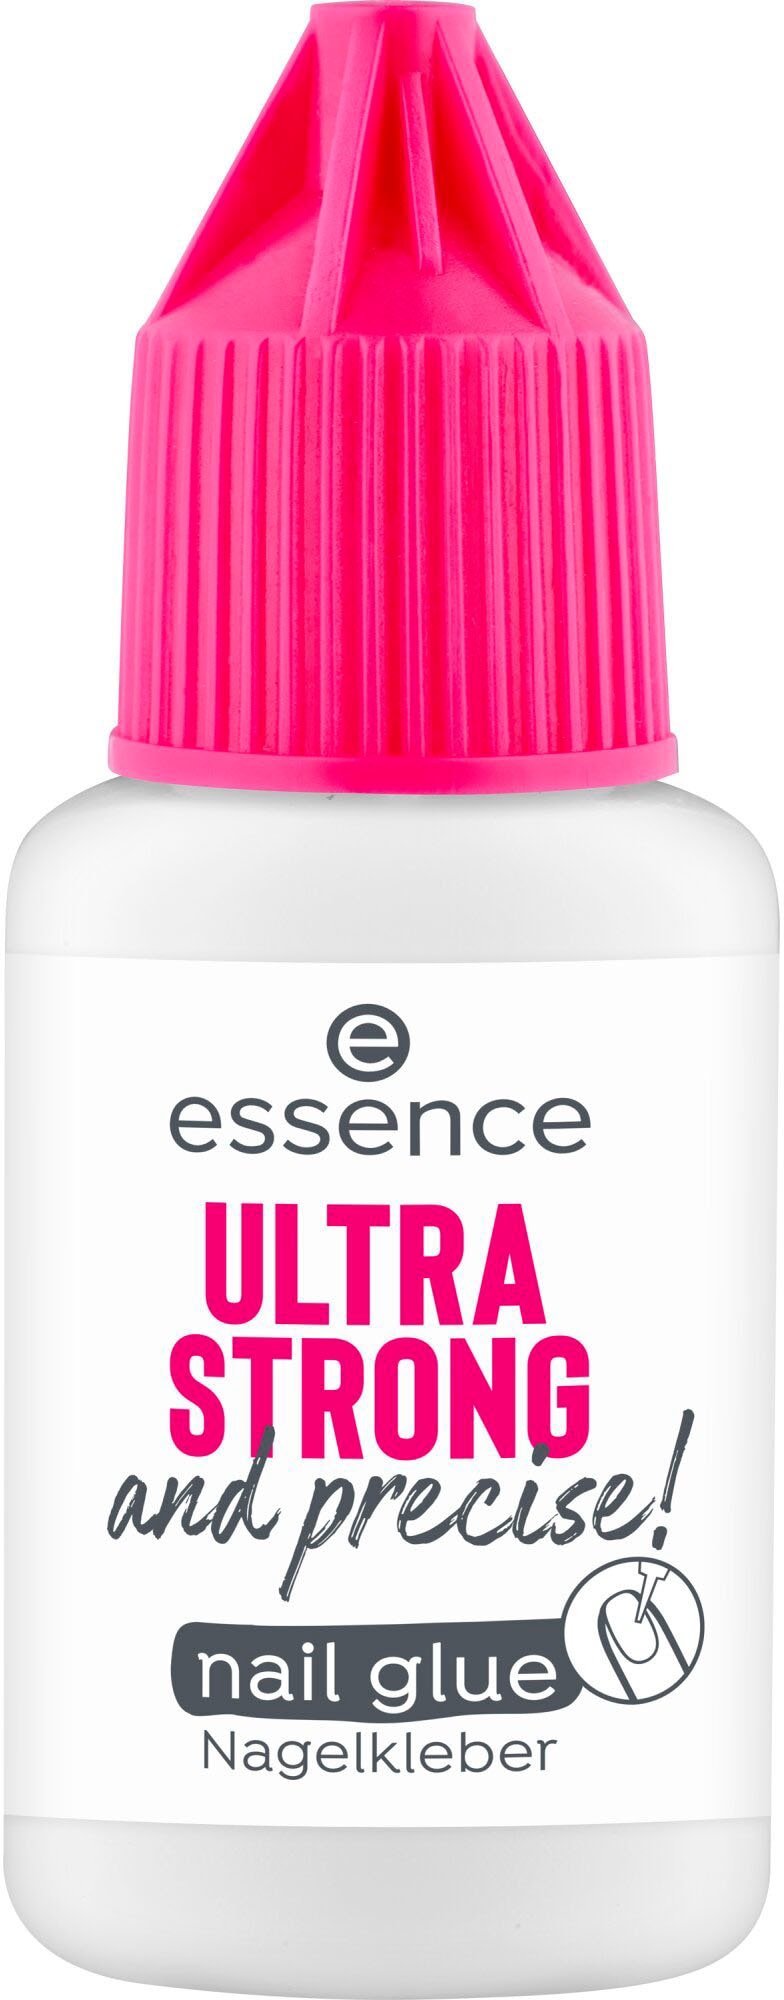 Essence Nagellack »ULTRA STRONG and precise! n...